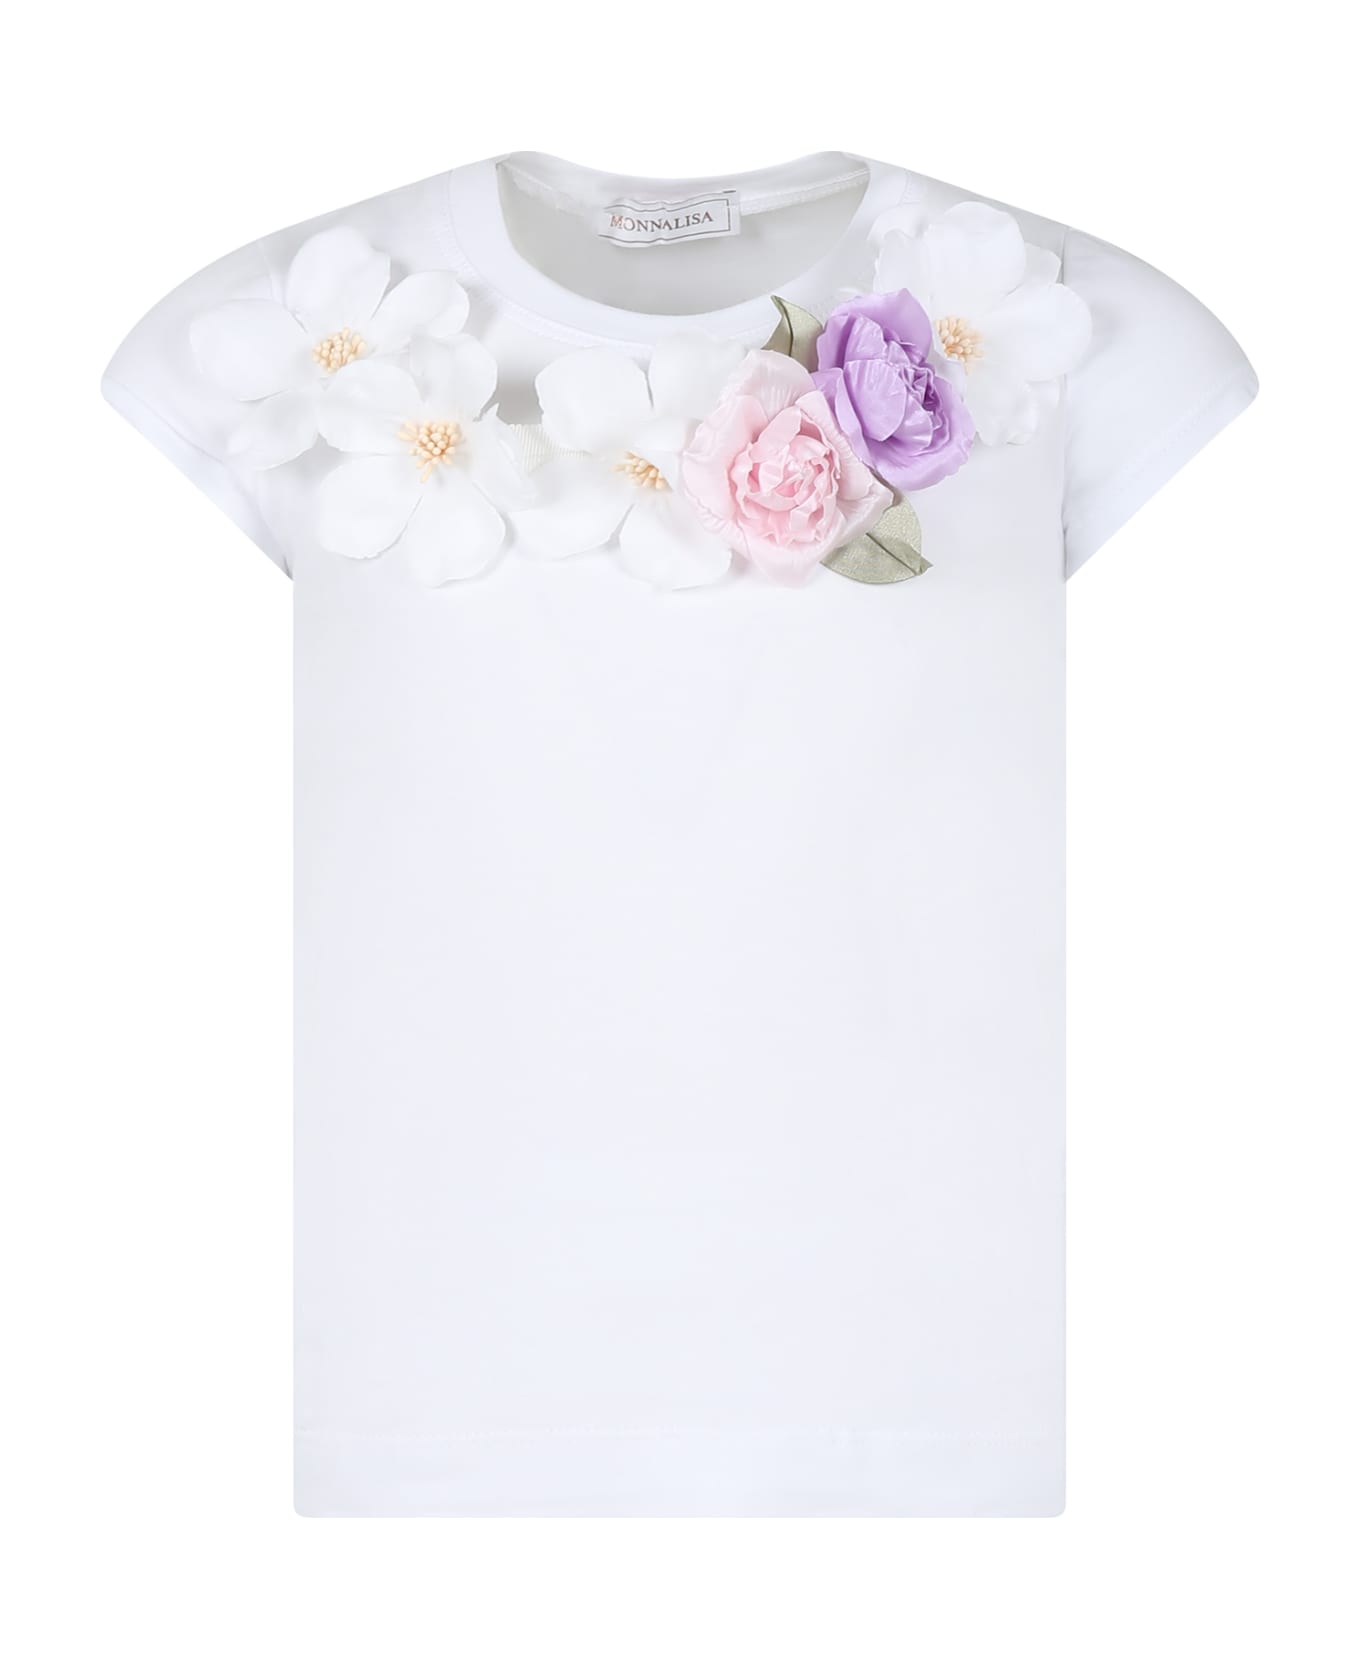 Monnalisa White Crop T-shirt For Girl With Flowers - White